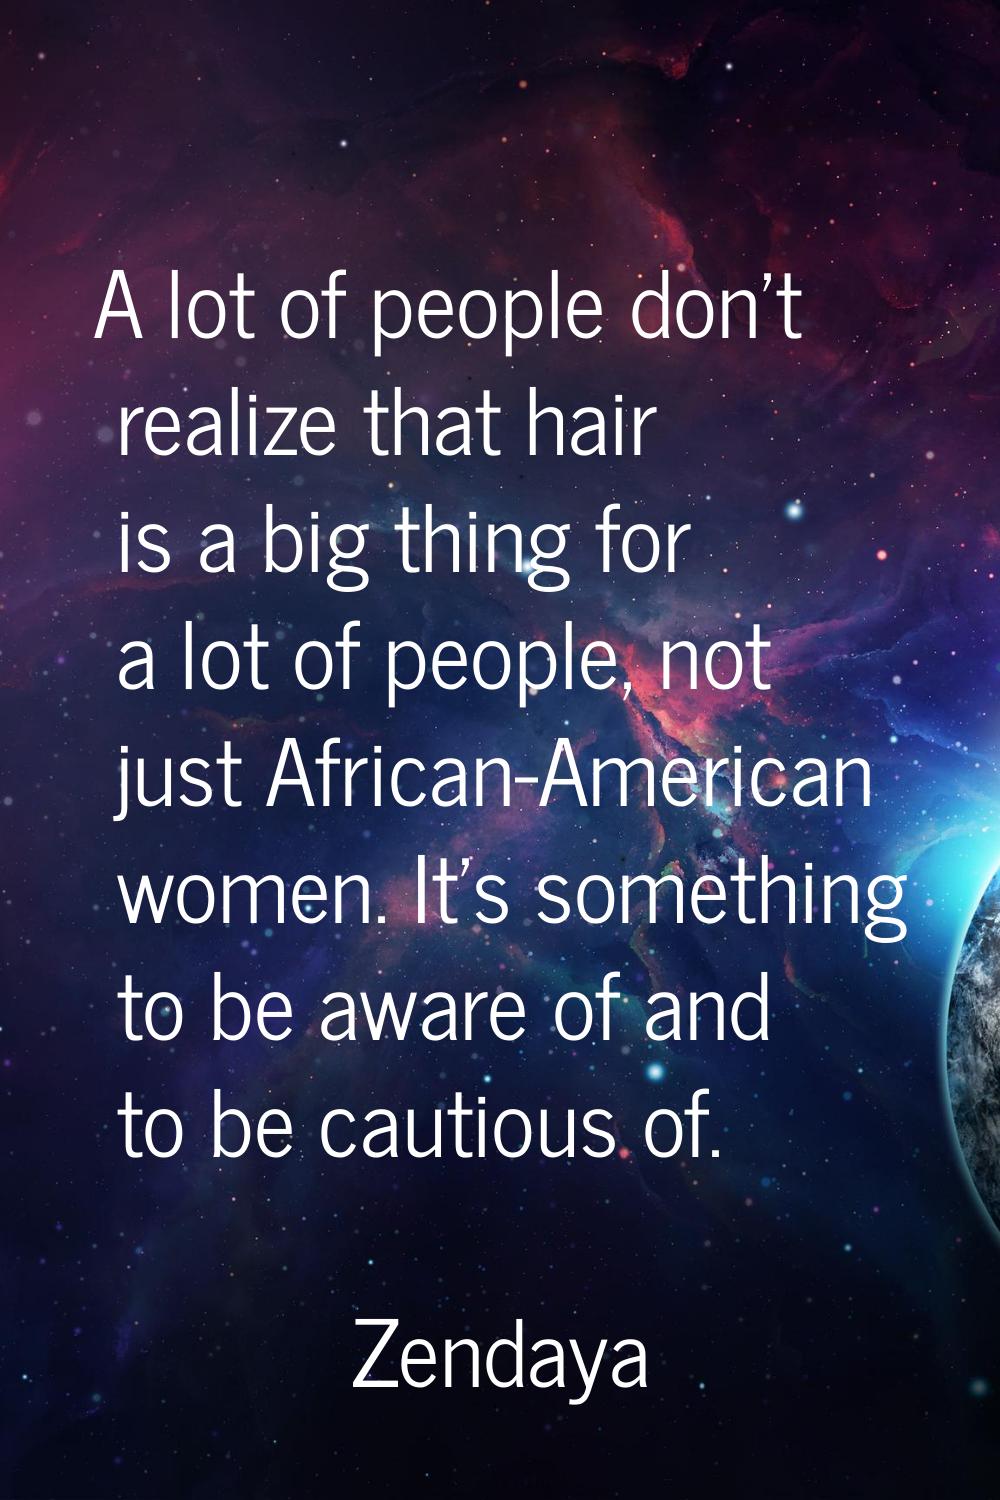 A lot of people don't realize that hair is a big thing for a lot of people, not just African-Americ